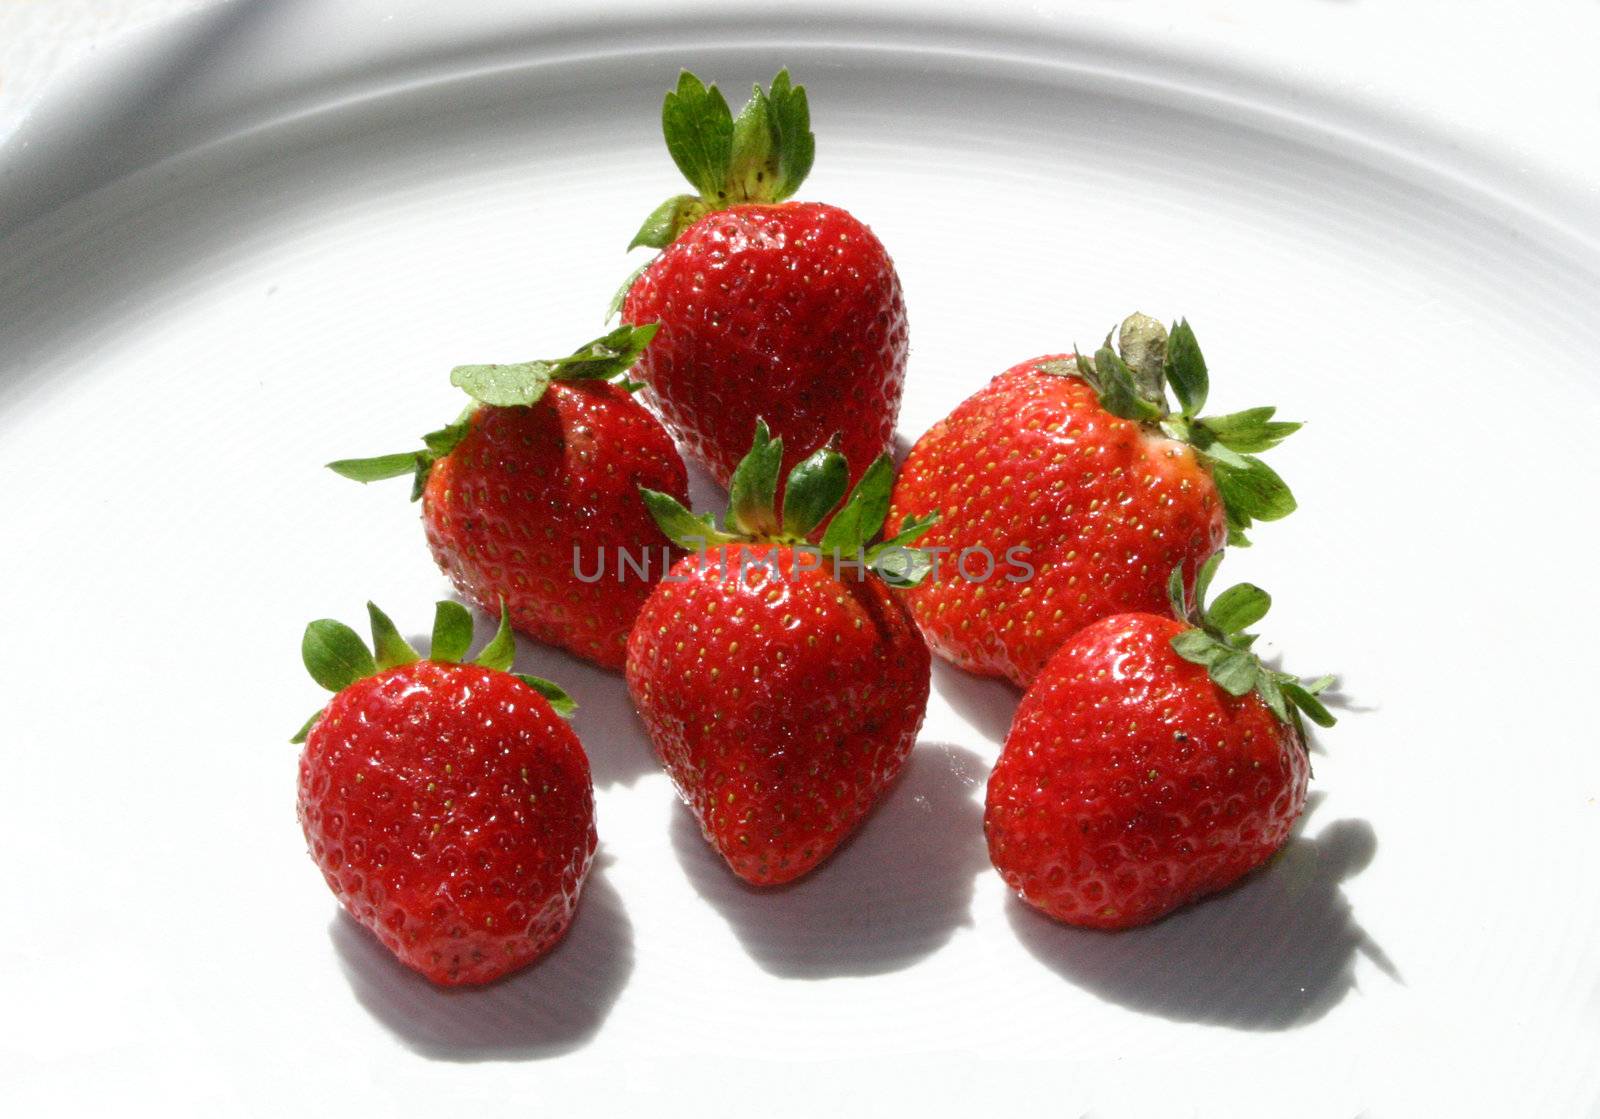 Six isolated red strawberries on white dish